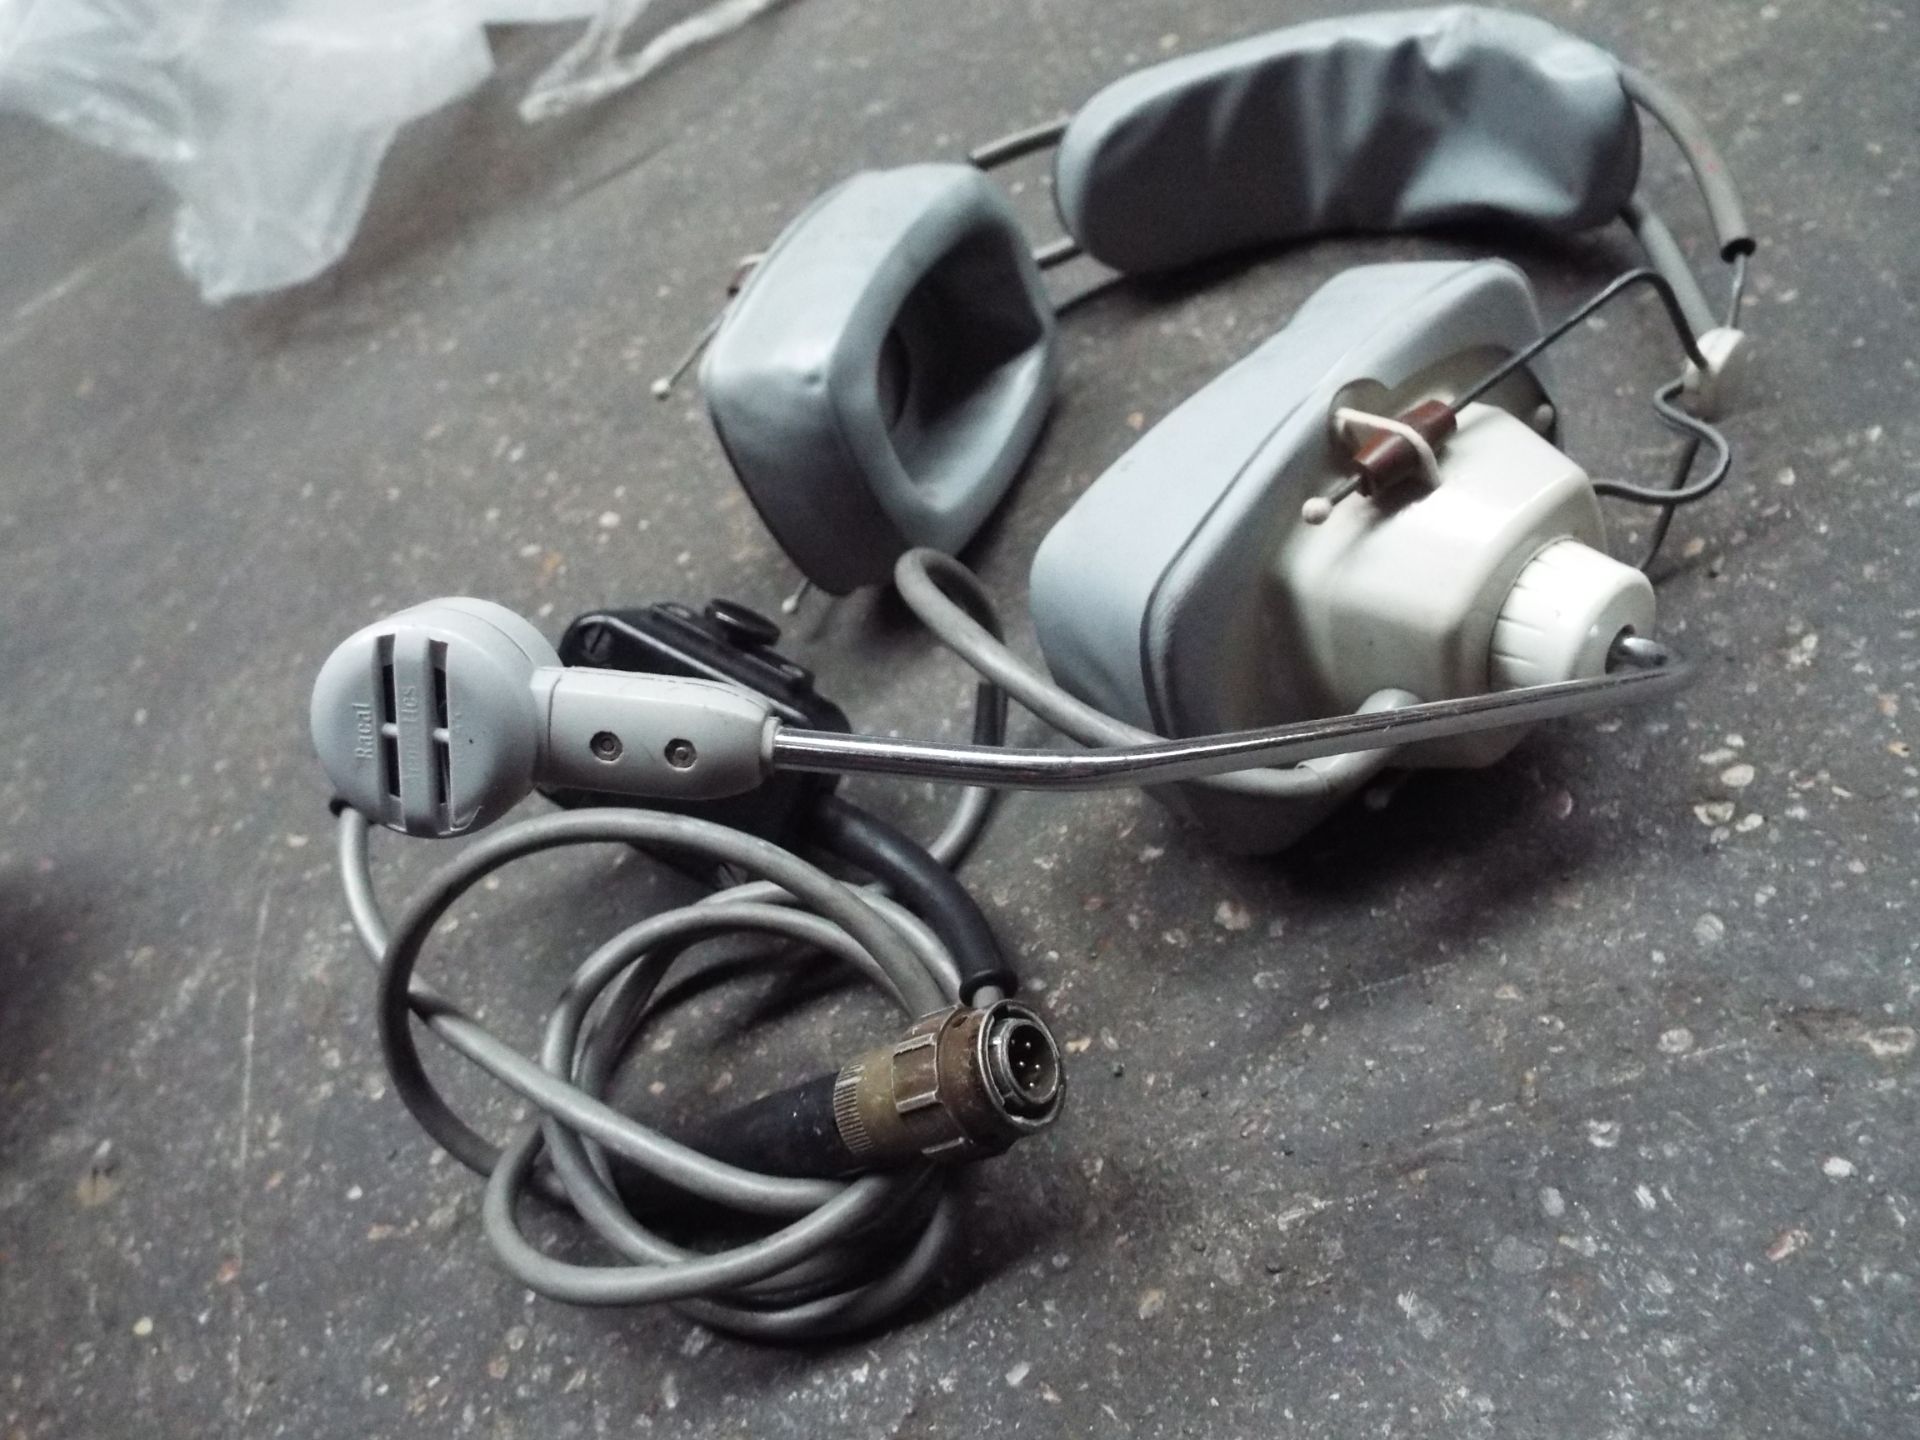 11 x Amplivox Astrolite Headsets as used by Air Traffic Control and Pilots - Image 3 of 5